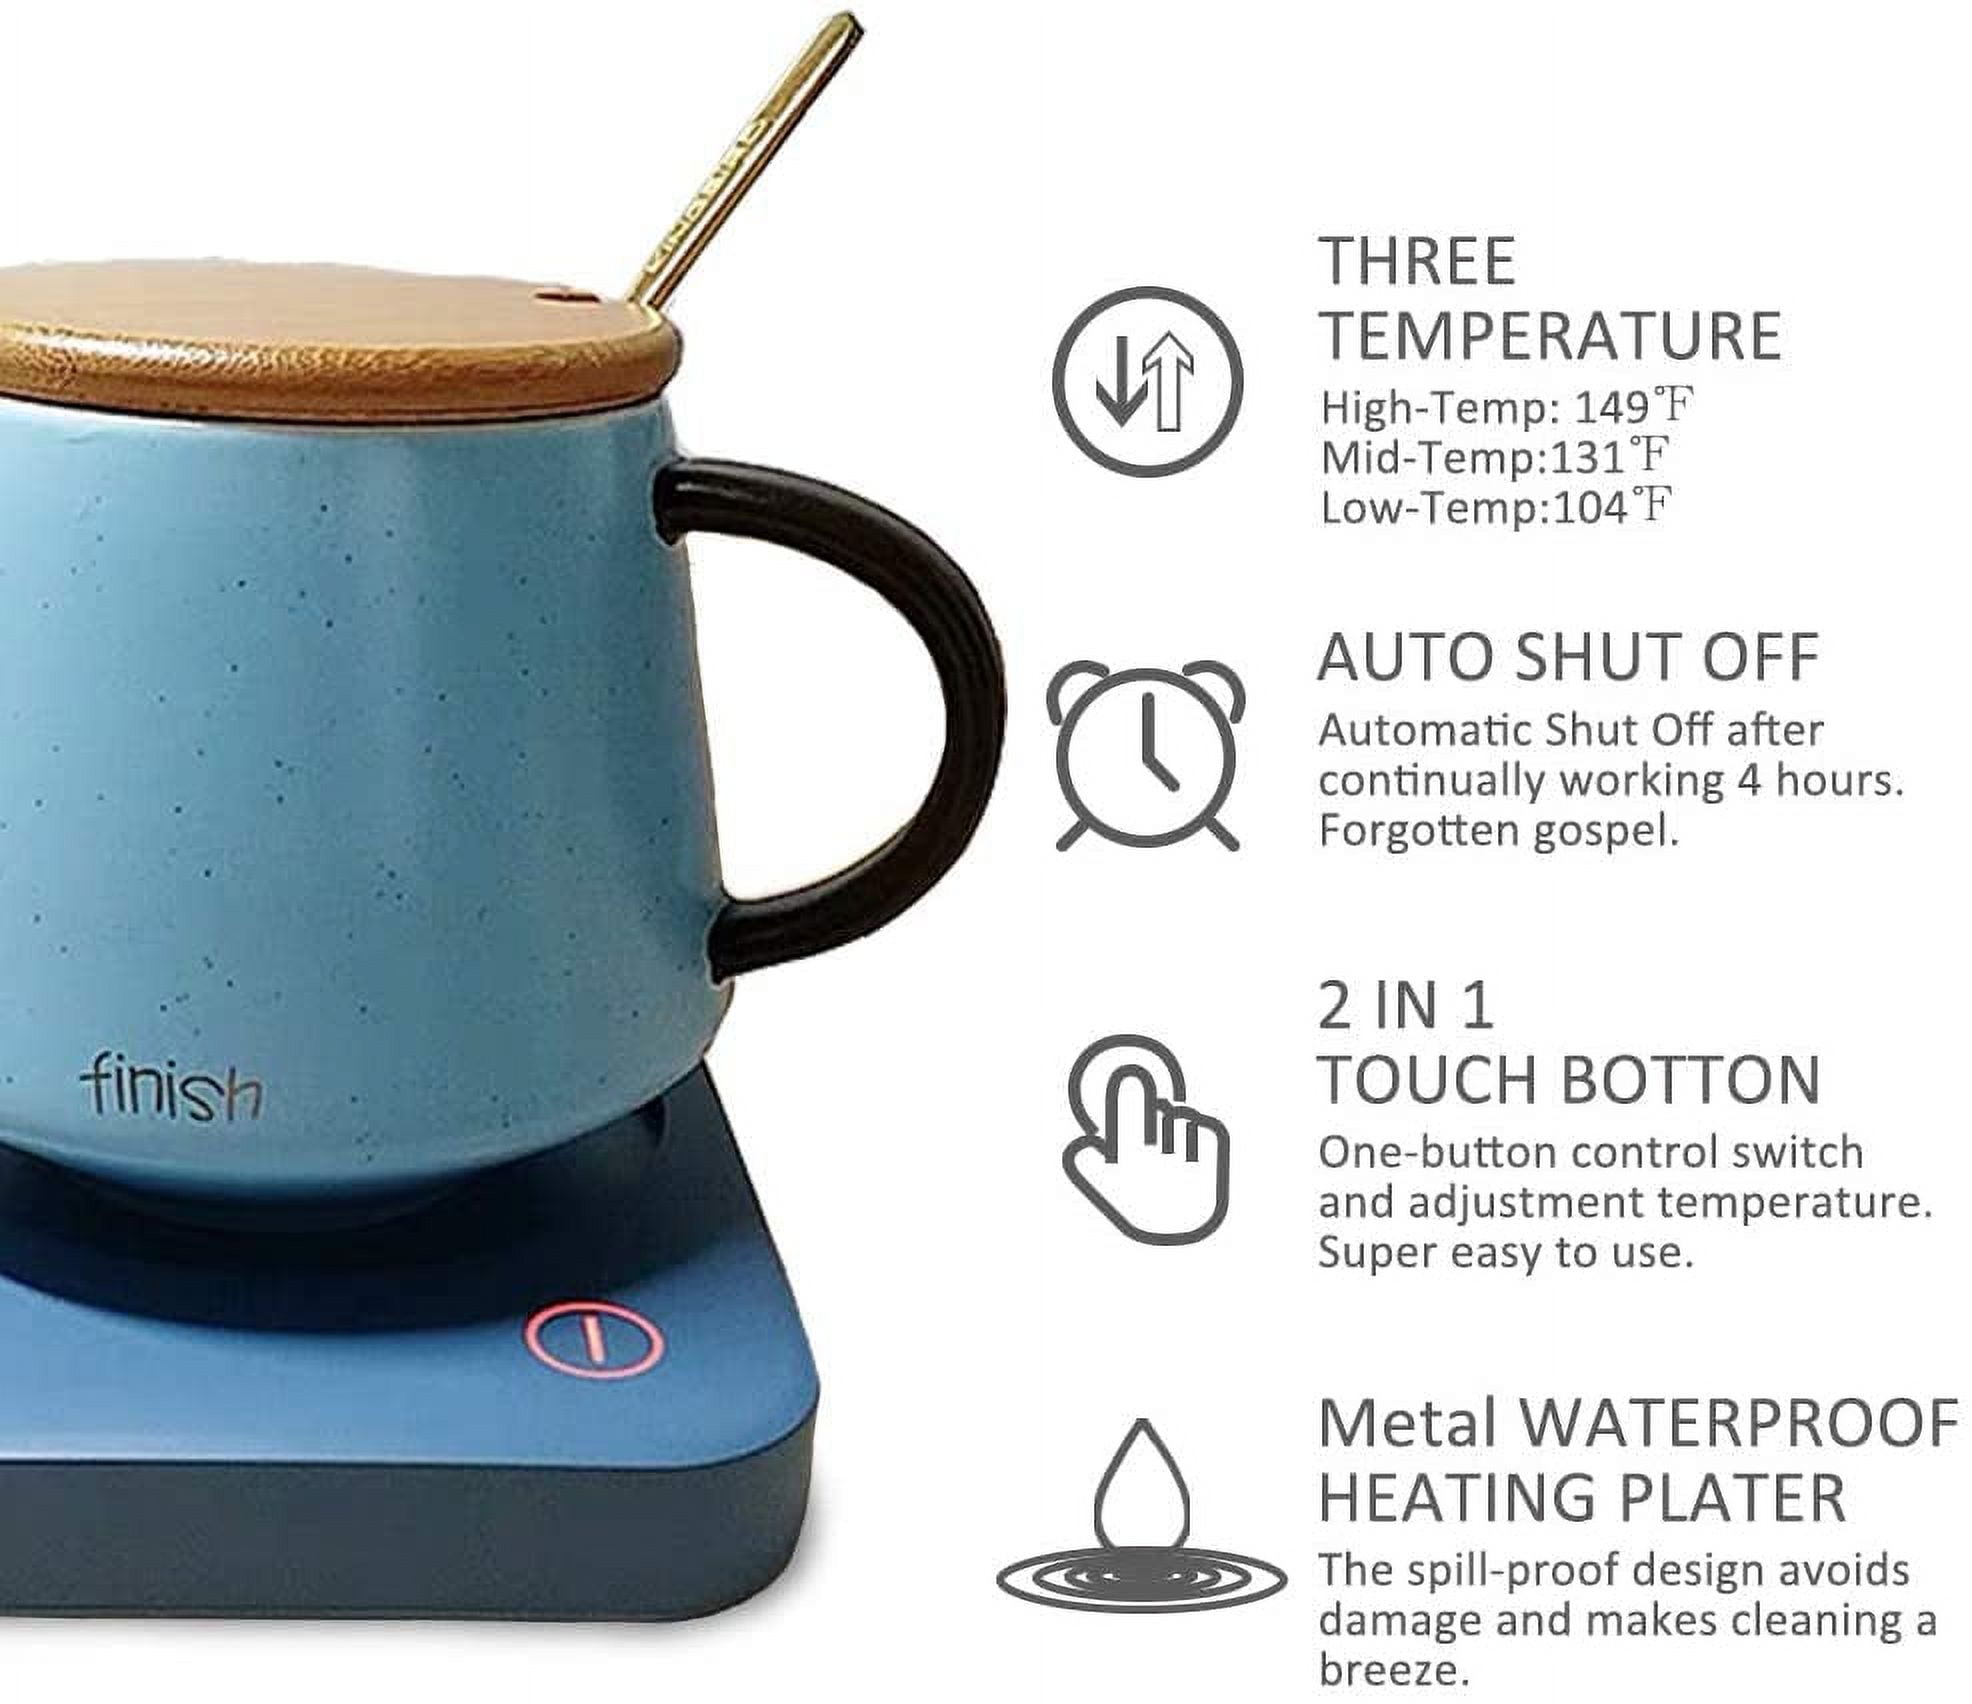 Voolta - the coffee cup warmer